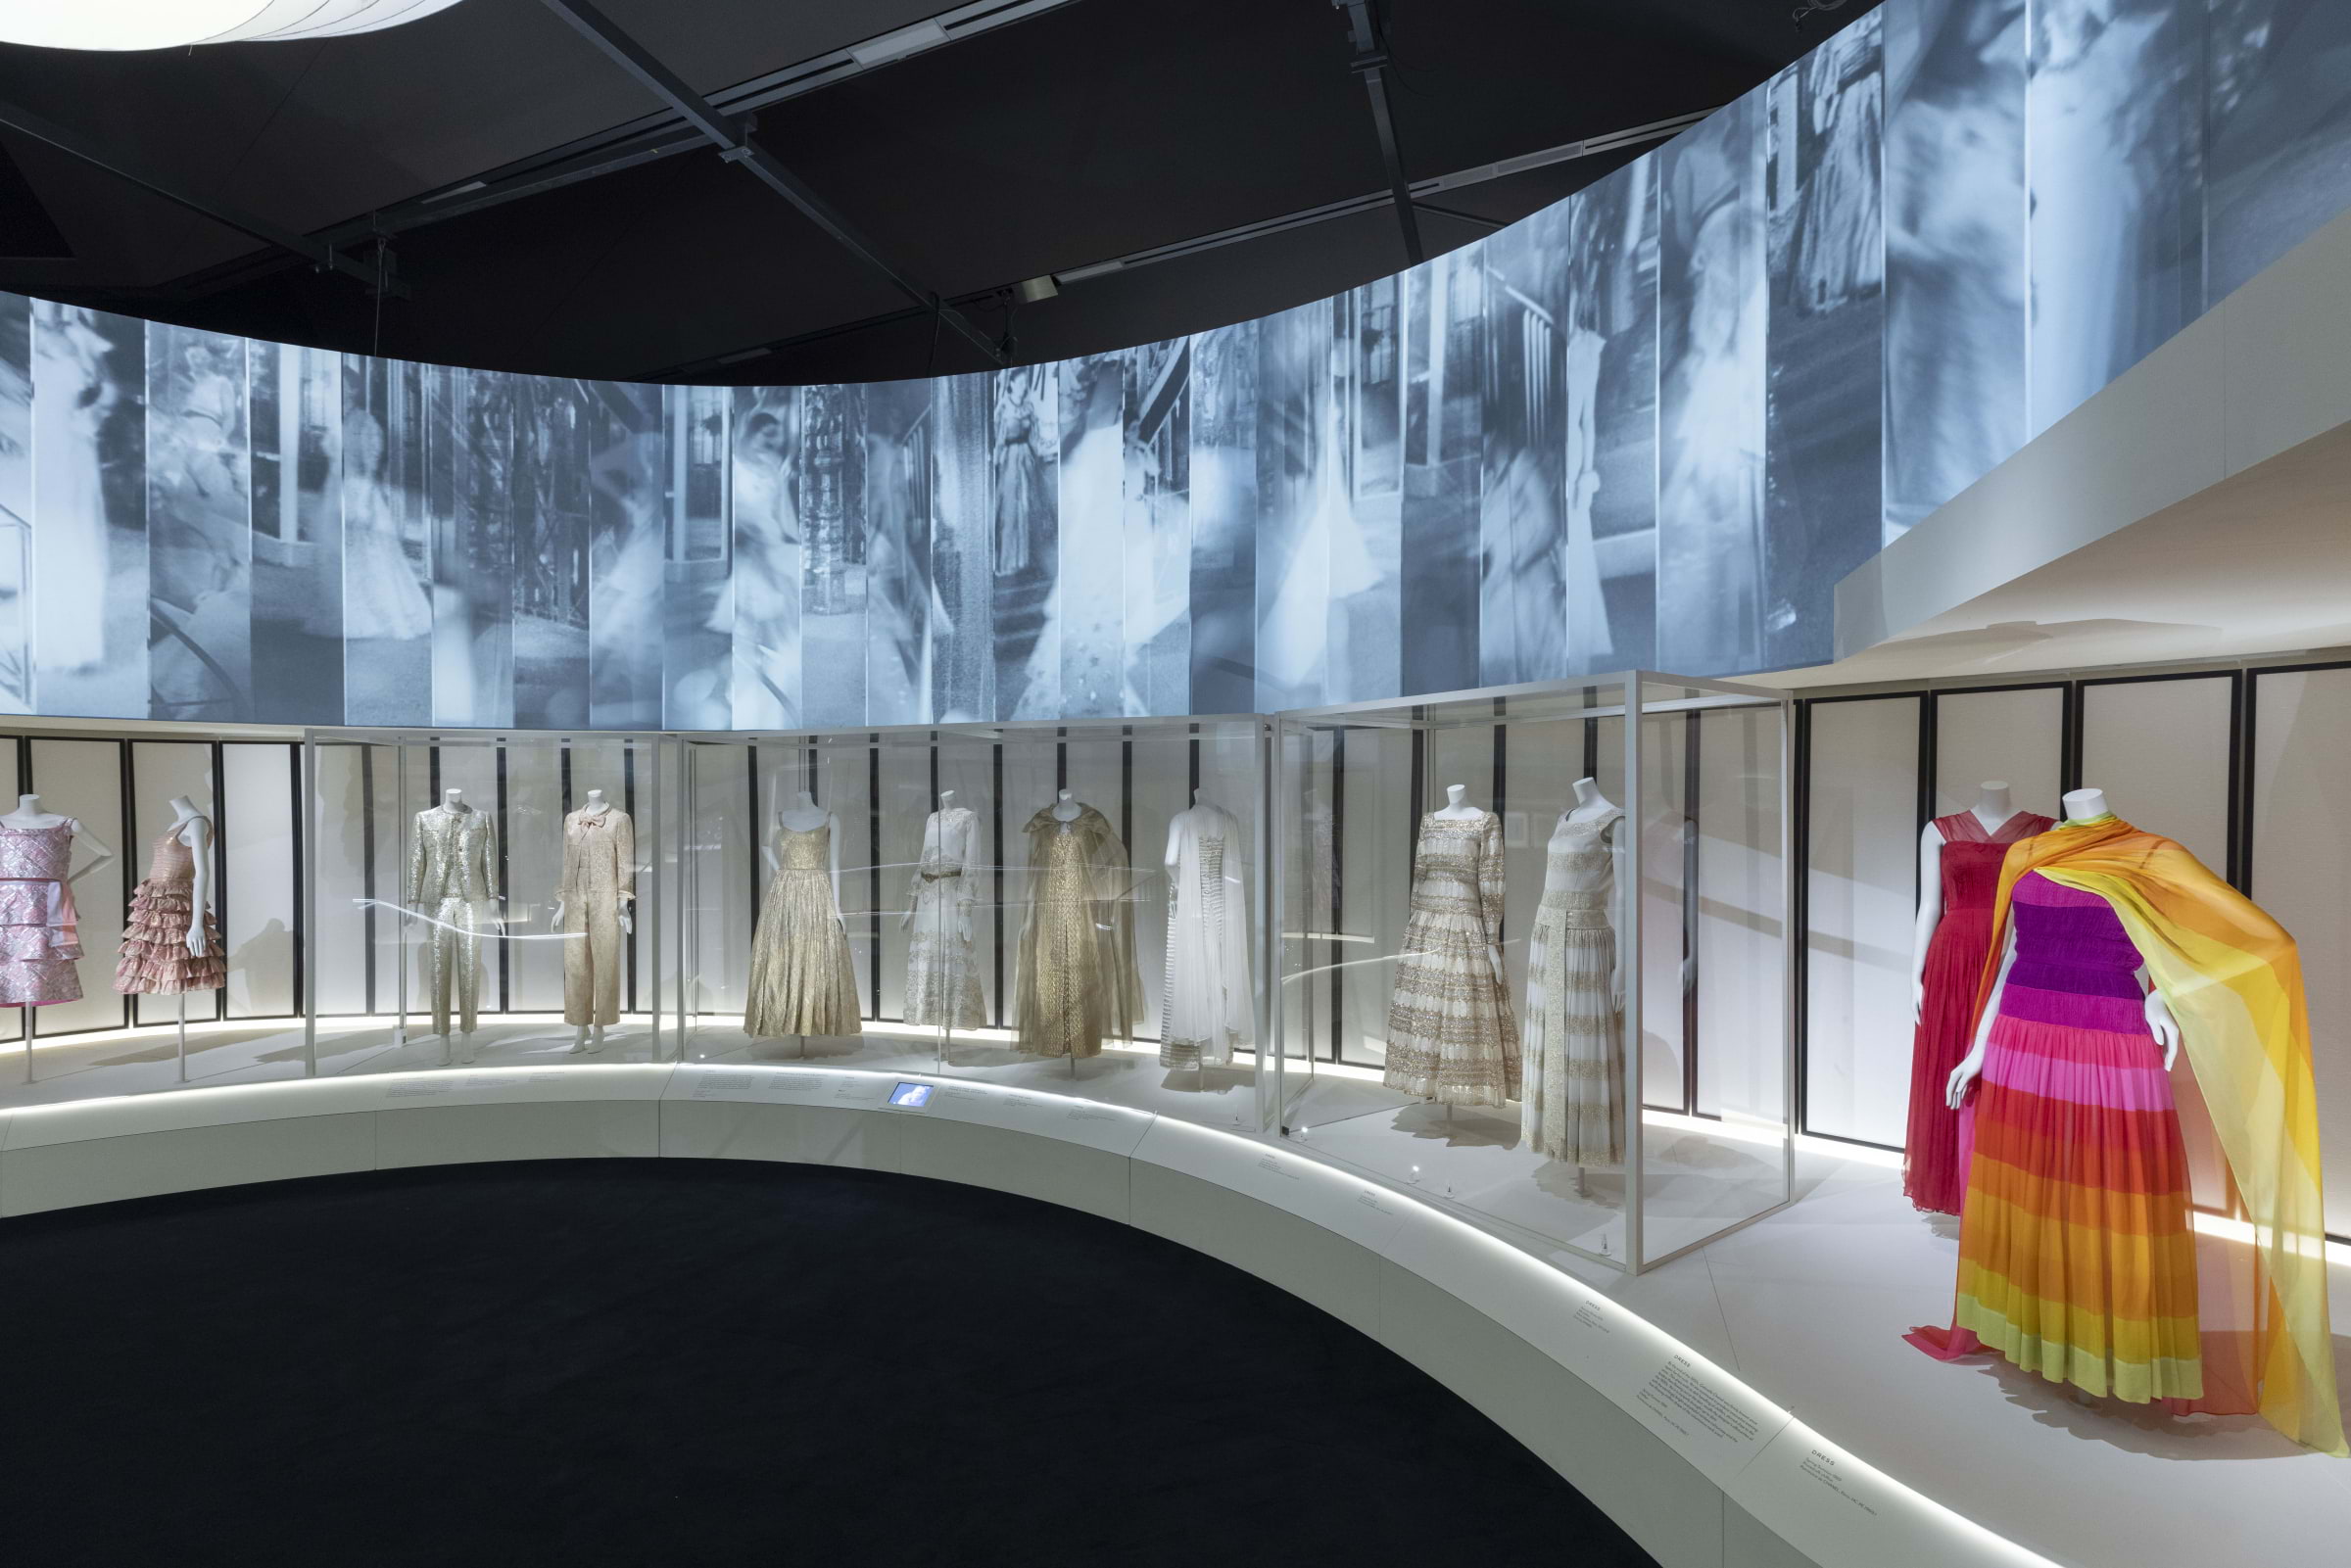 This blockbuster V&A exhibition delves into the work of fashion icon Coco Chanel